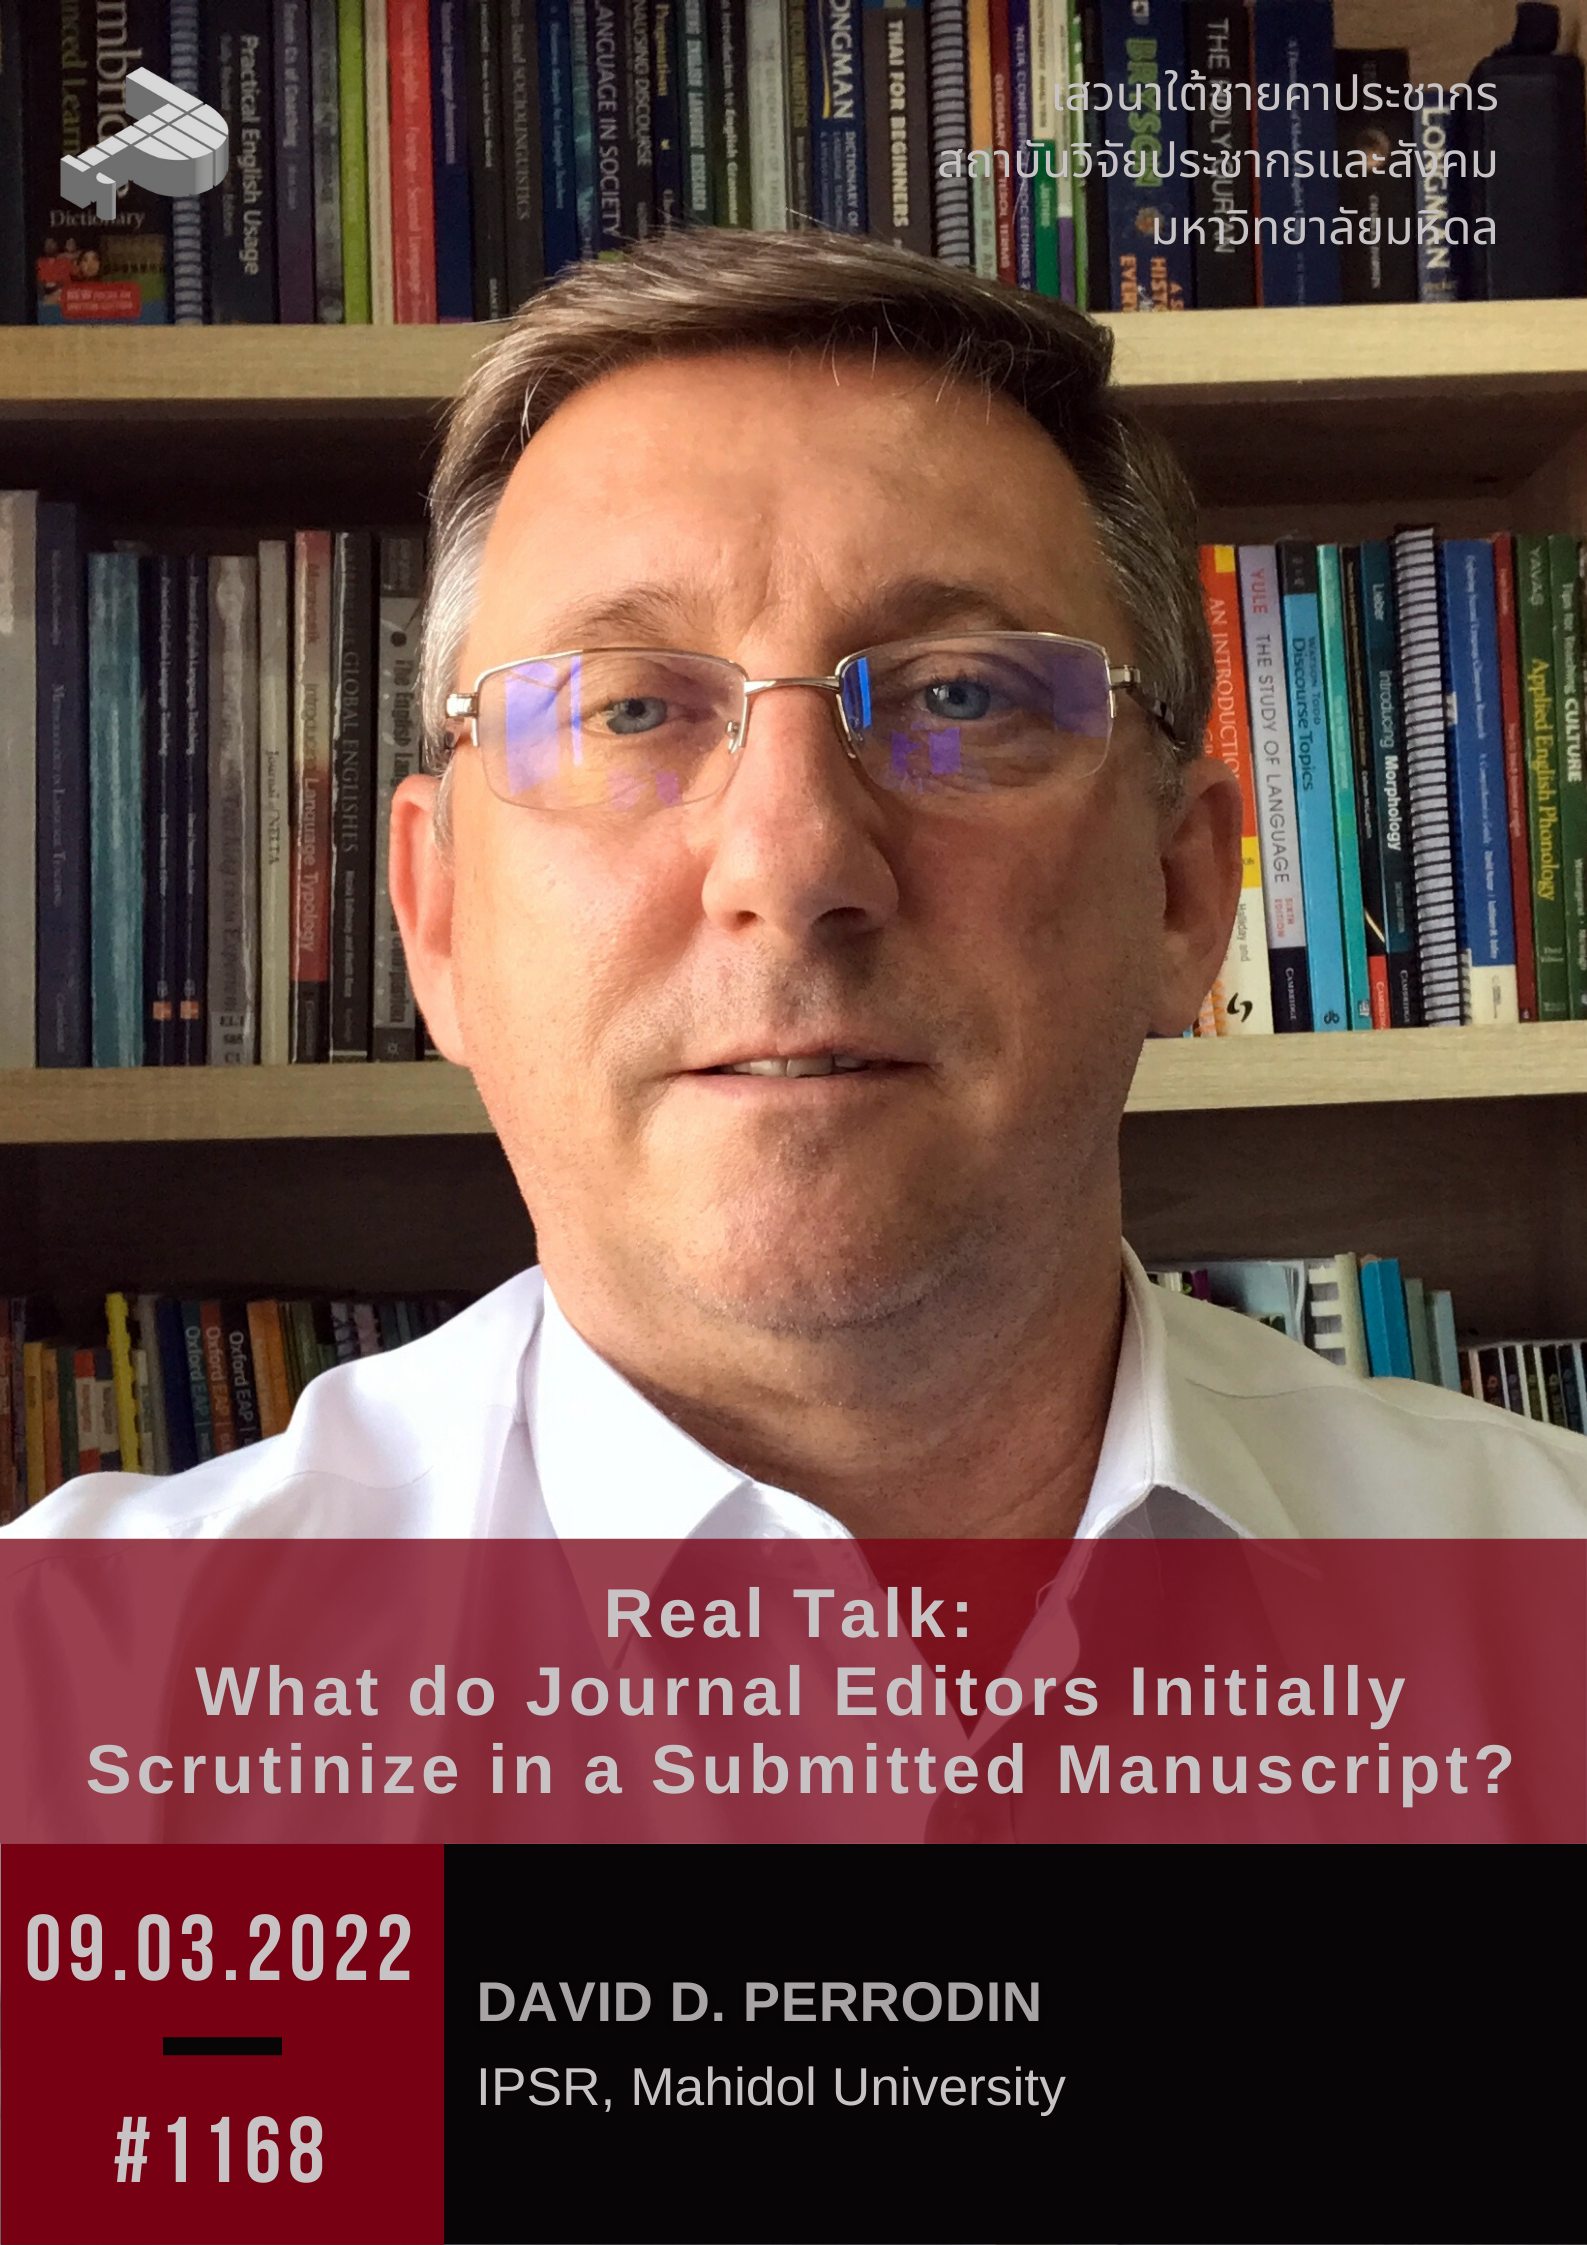 Real Talk: What do Journal Editors Initially Scrutinize in a Submitted Manuscript?